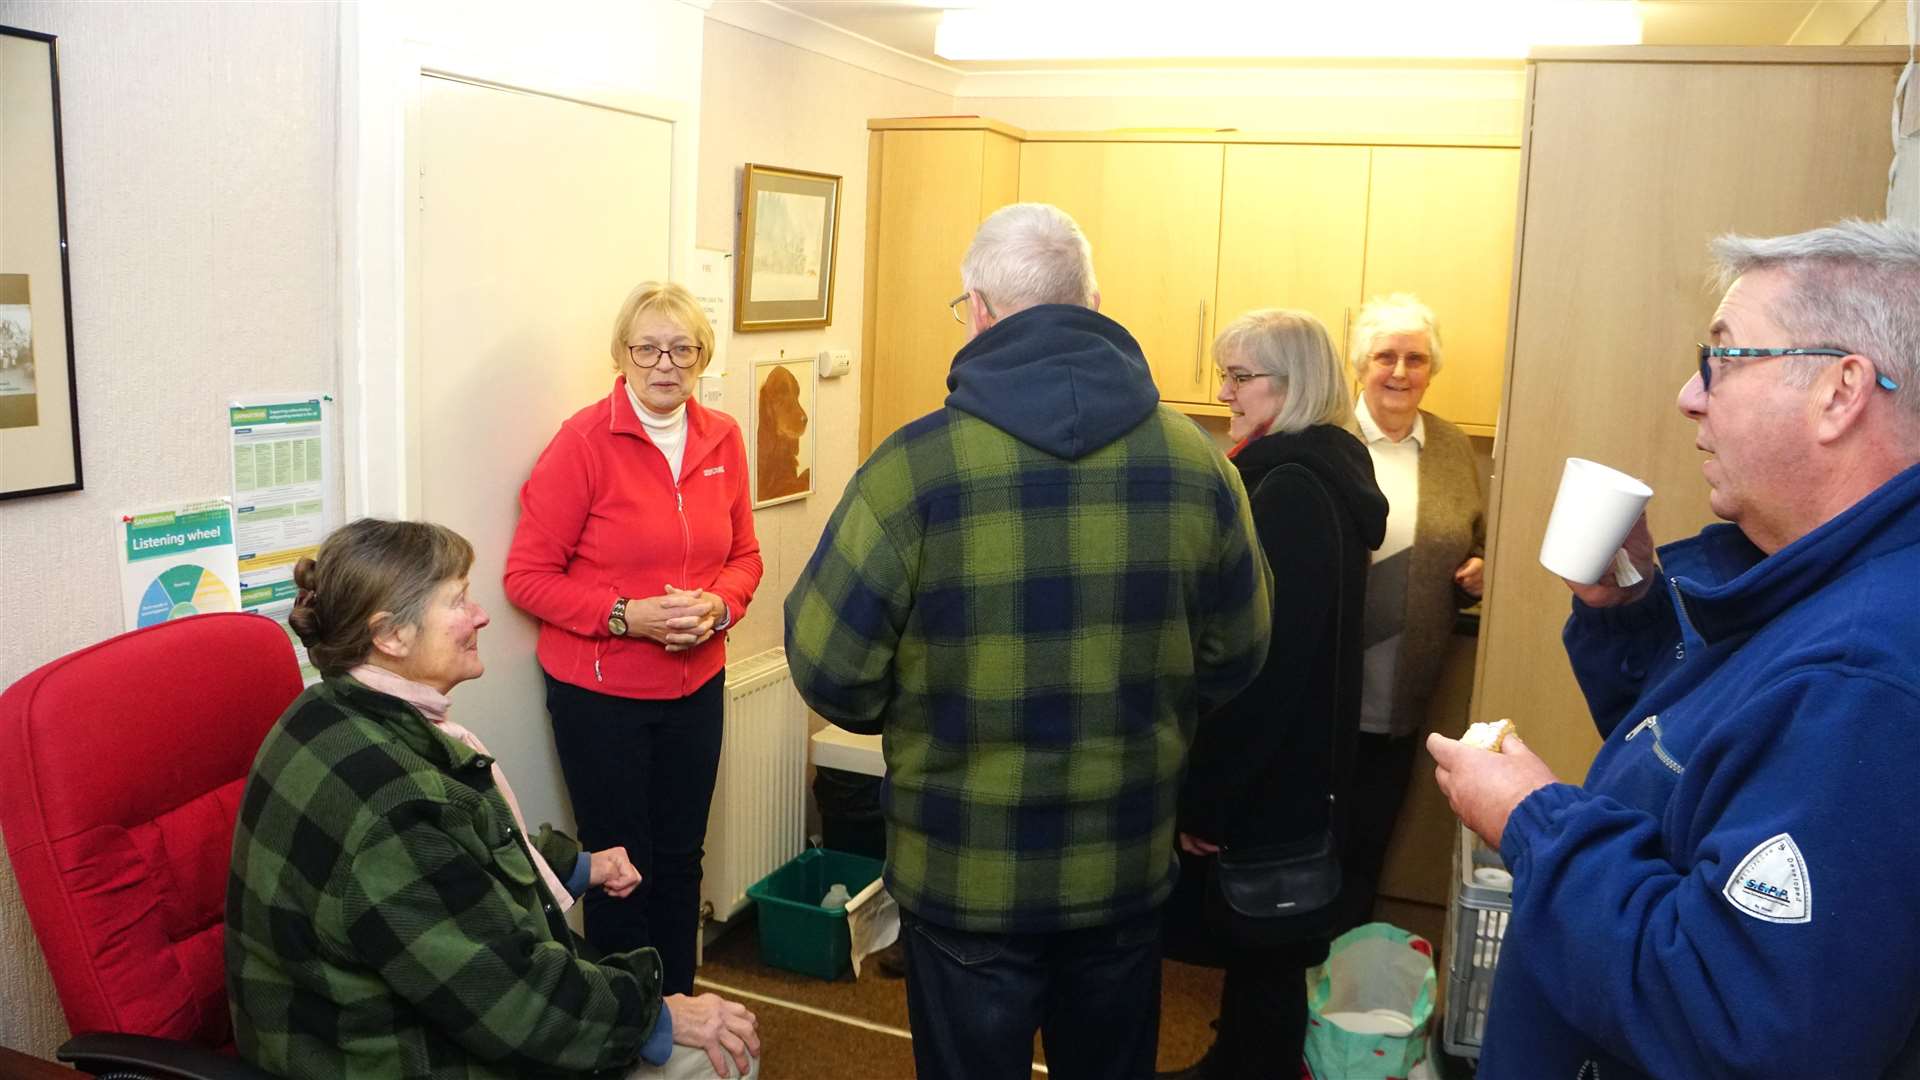 The Samaritans branch in Thurso had a special open day on Saturday morning in which the public could come in and find out more about volunteering. Picture: DGS